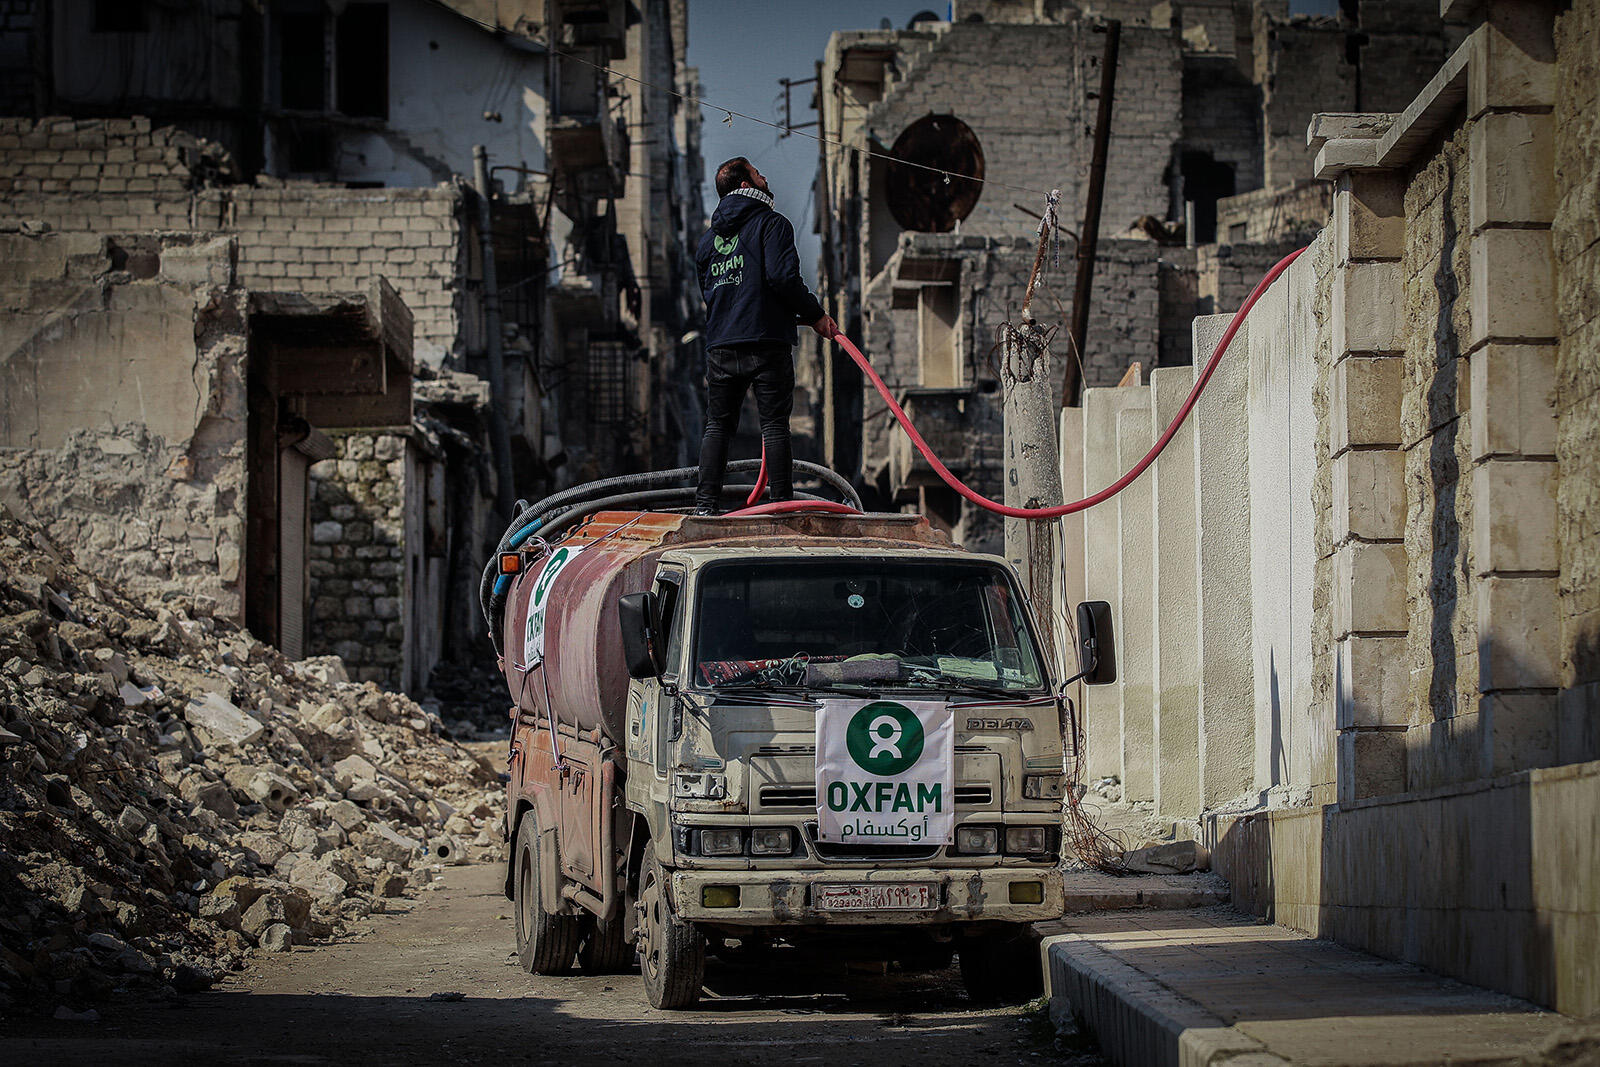 watertruck delivering water in shelters in Aleppo